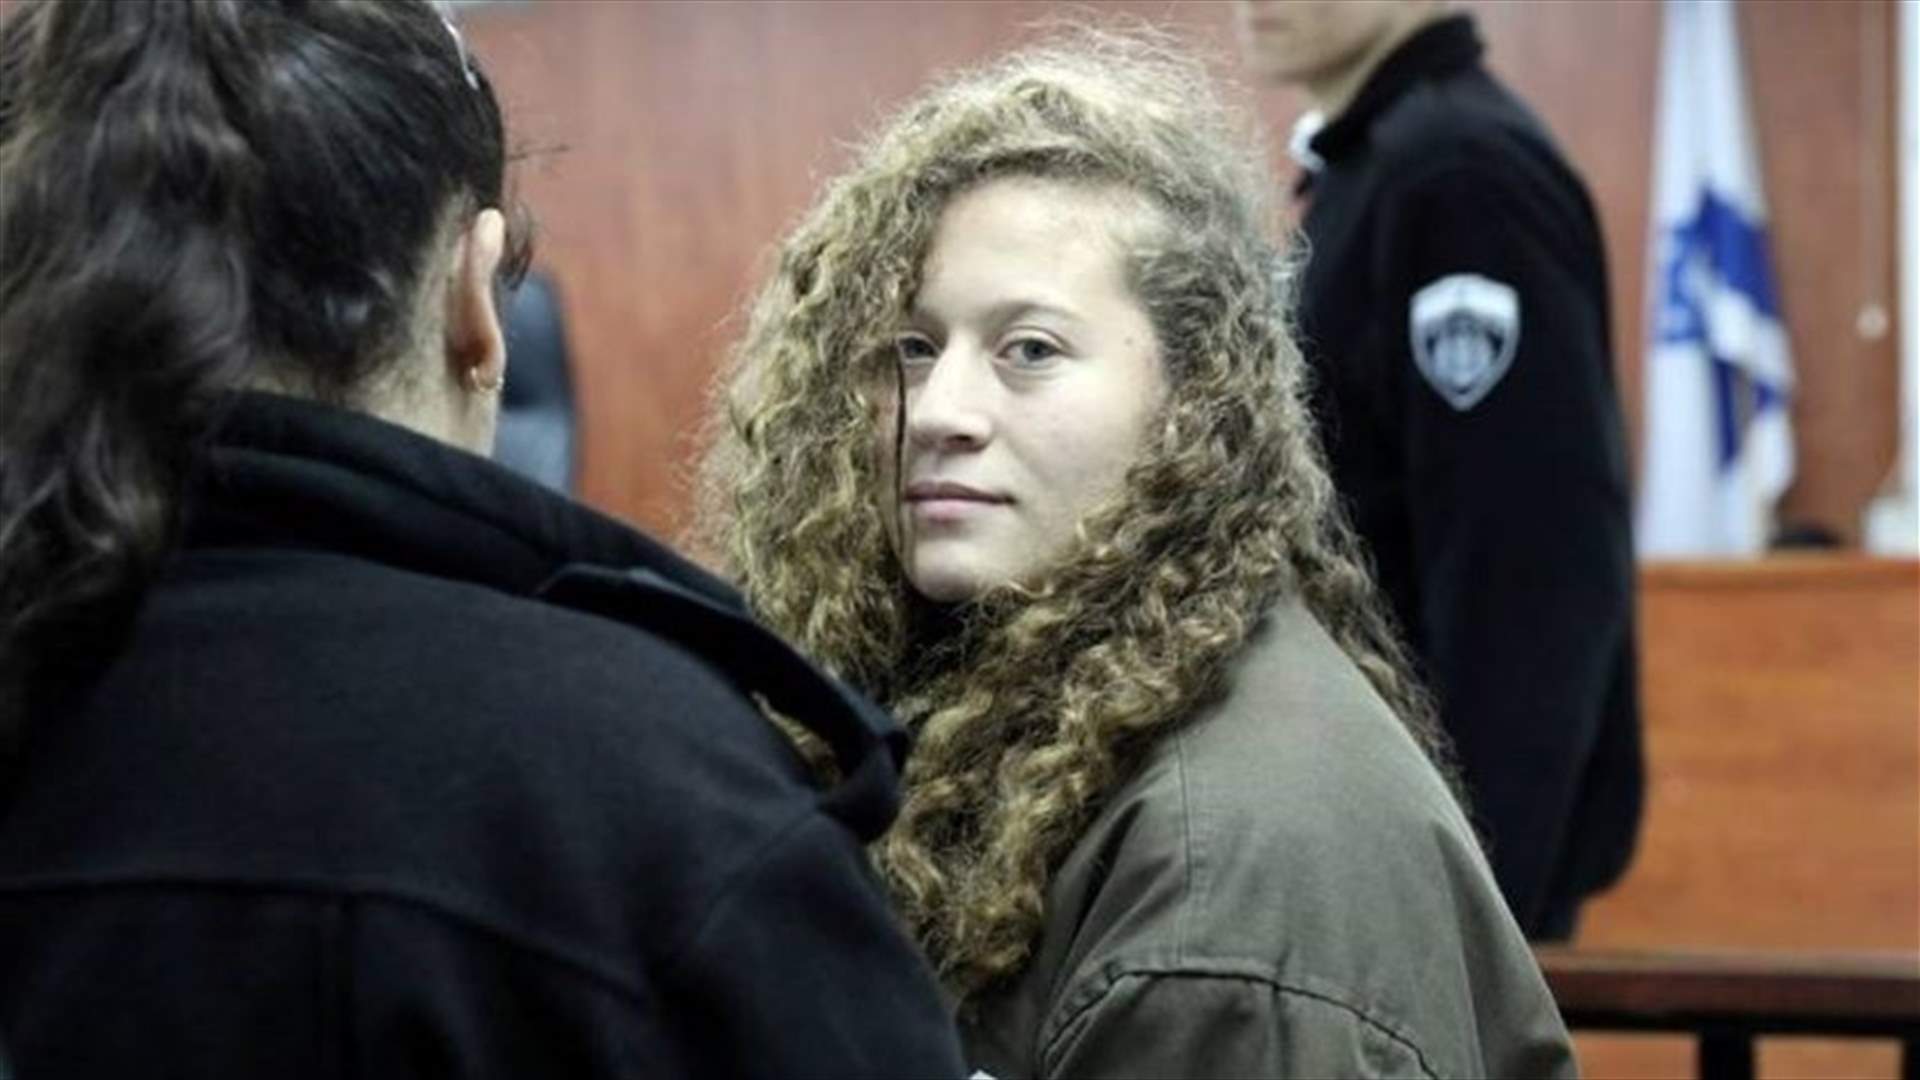 Palestinian teen girl on trial for striking Israeli soldier reported to agree plea deal